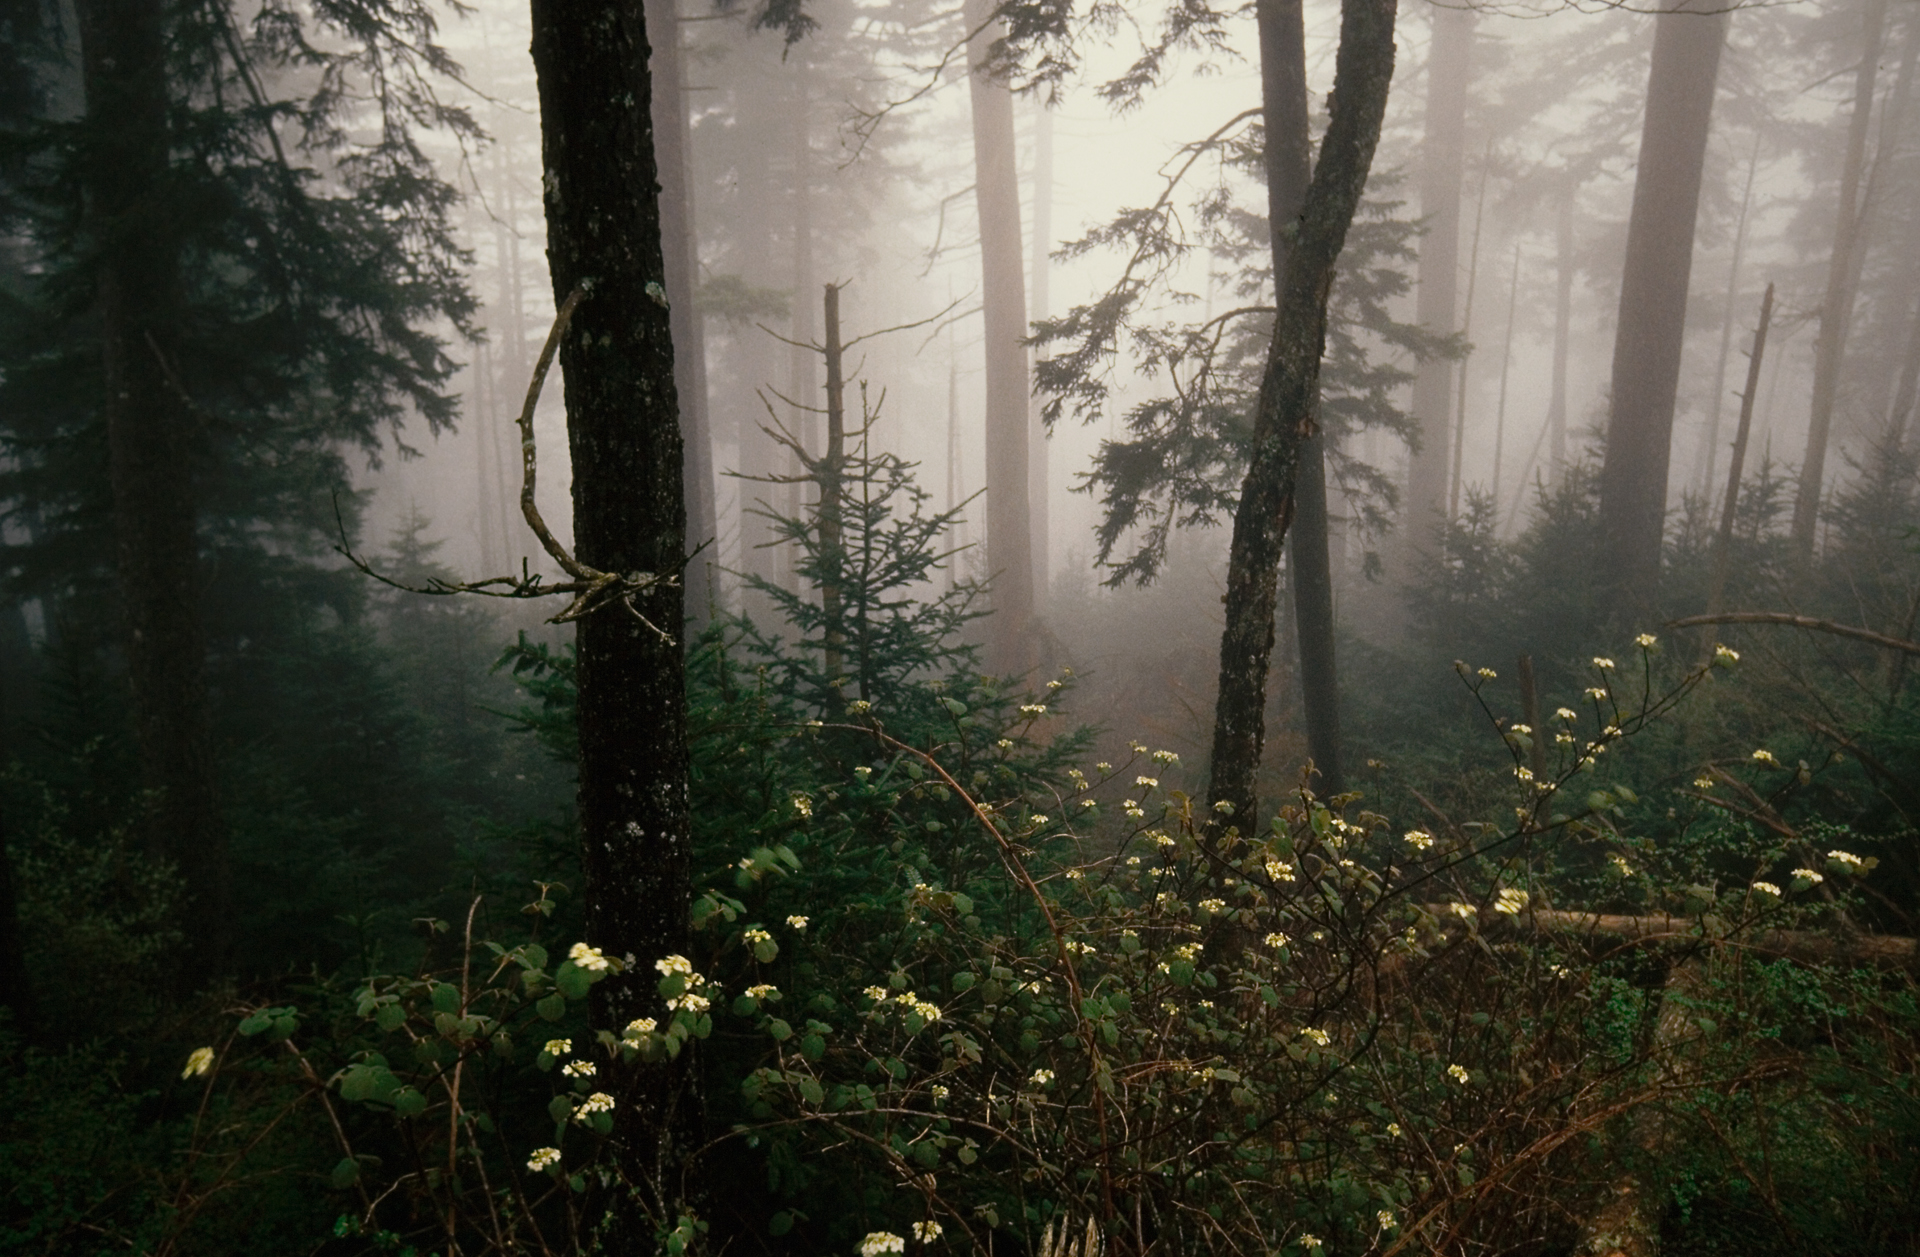  Blossoms thrive amongst fallen trees in foggy weather.  Clingman’s Dome Road, Tennessee  